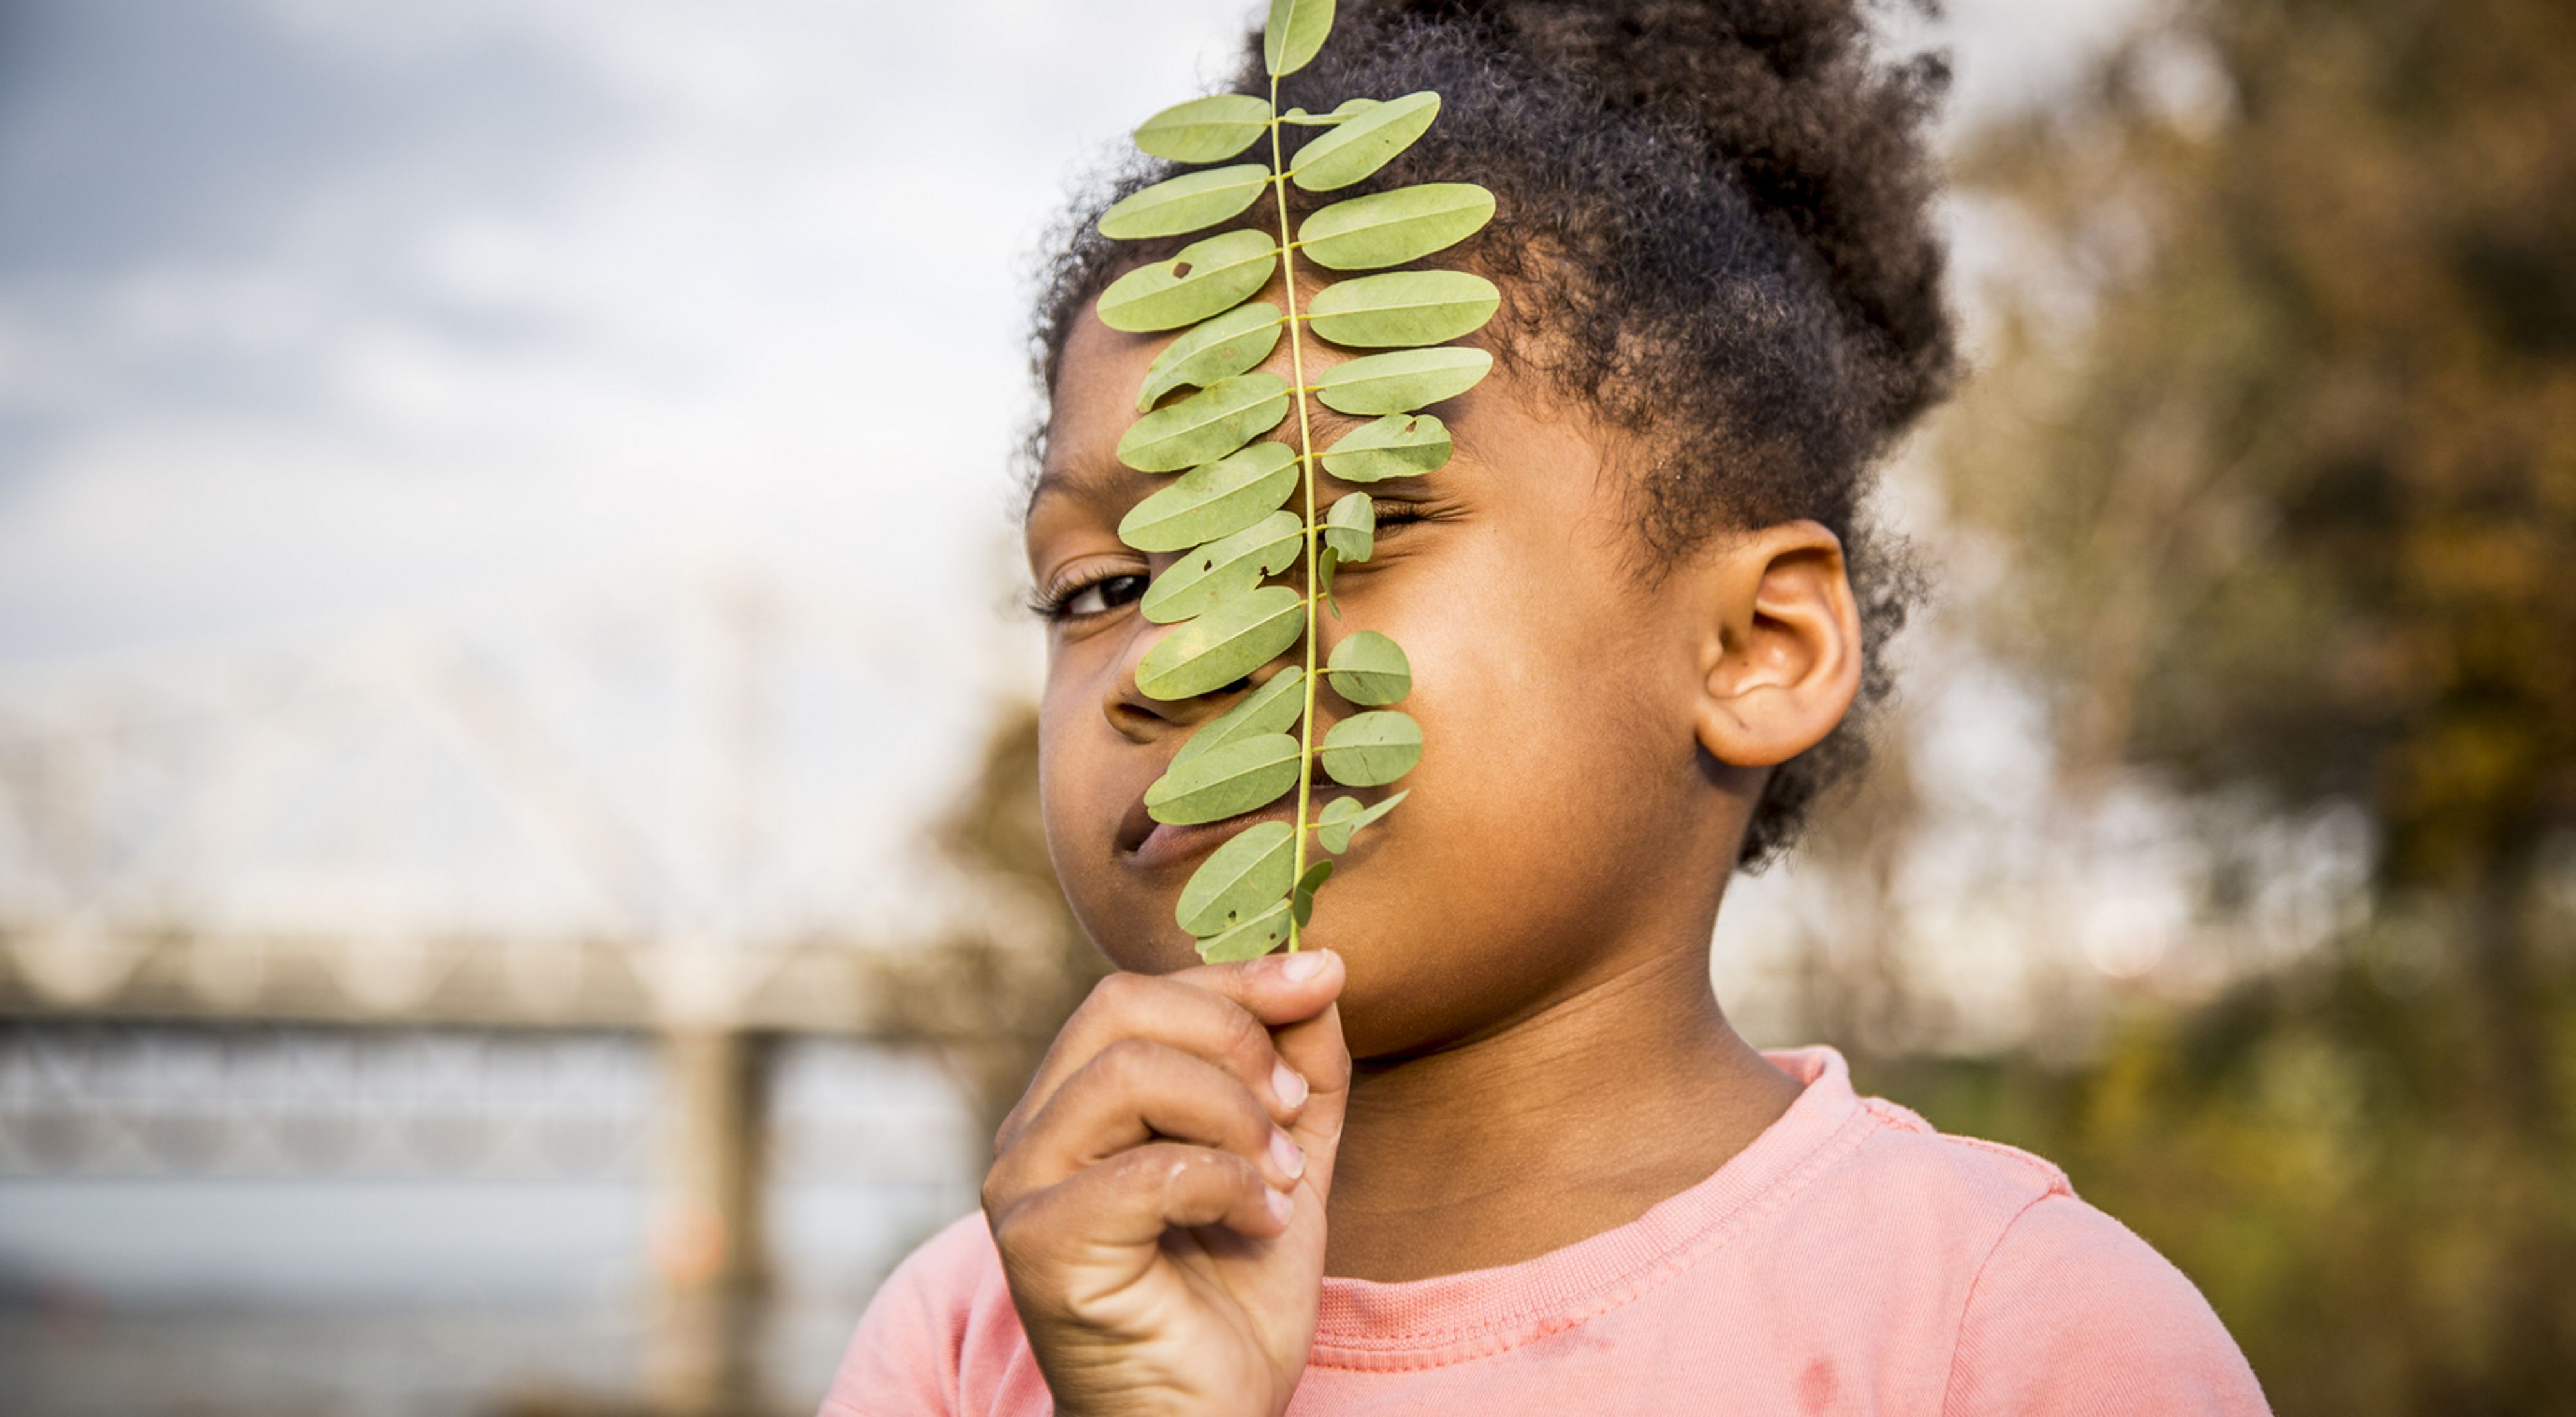 Young girl looks through a sprig of leaves.